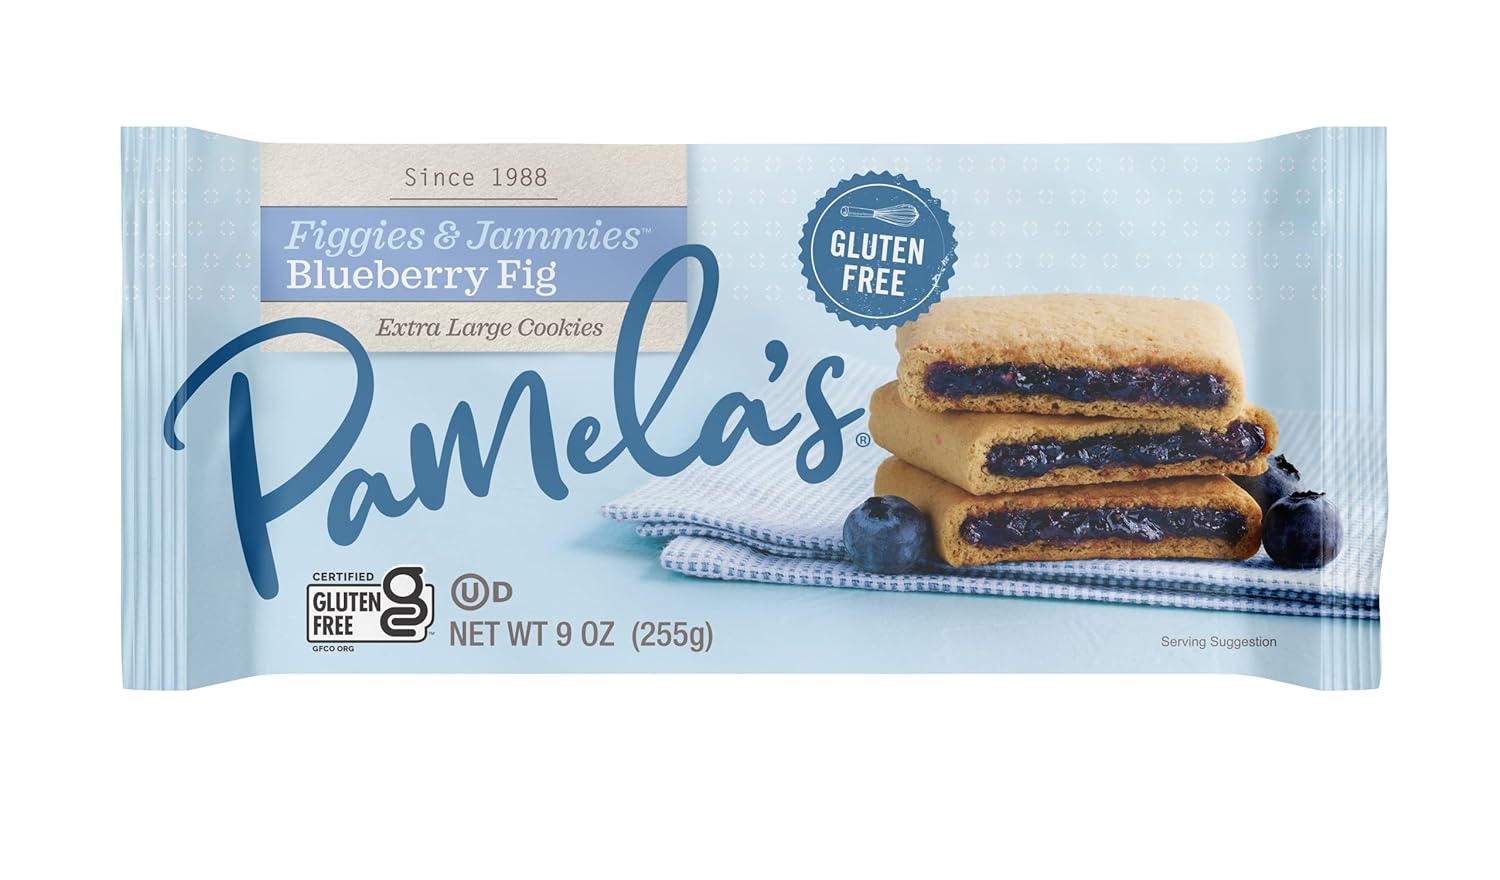 Pamela's Products Gluten Free Figgies & Jammies Cookies, Blueberry and Fig, 9 Ounce (Pack of 6)